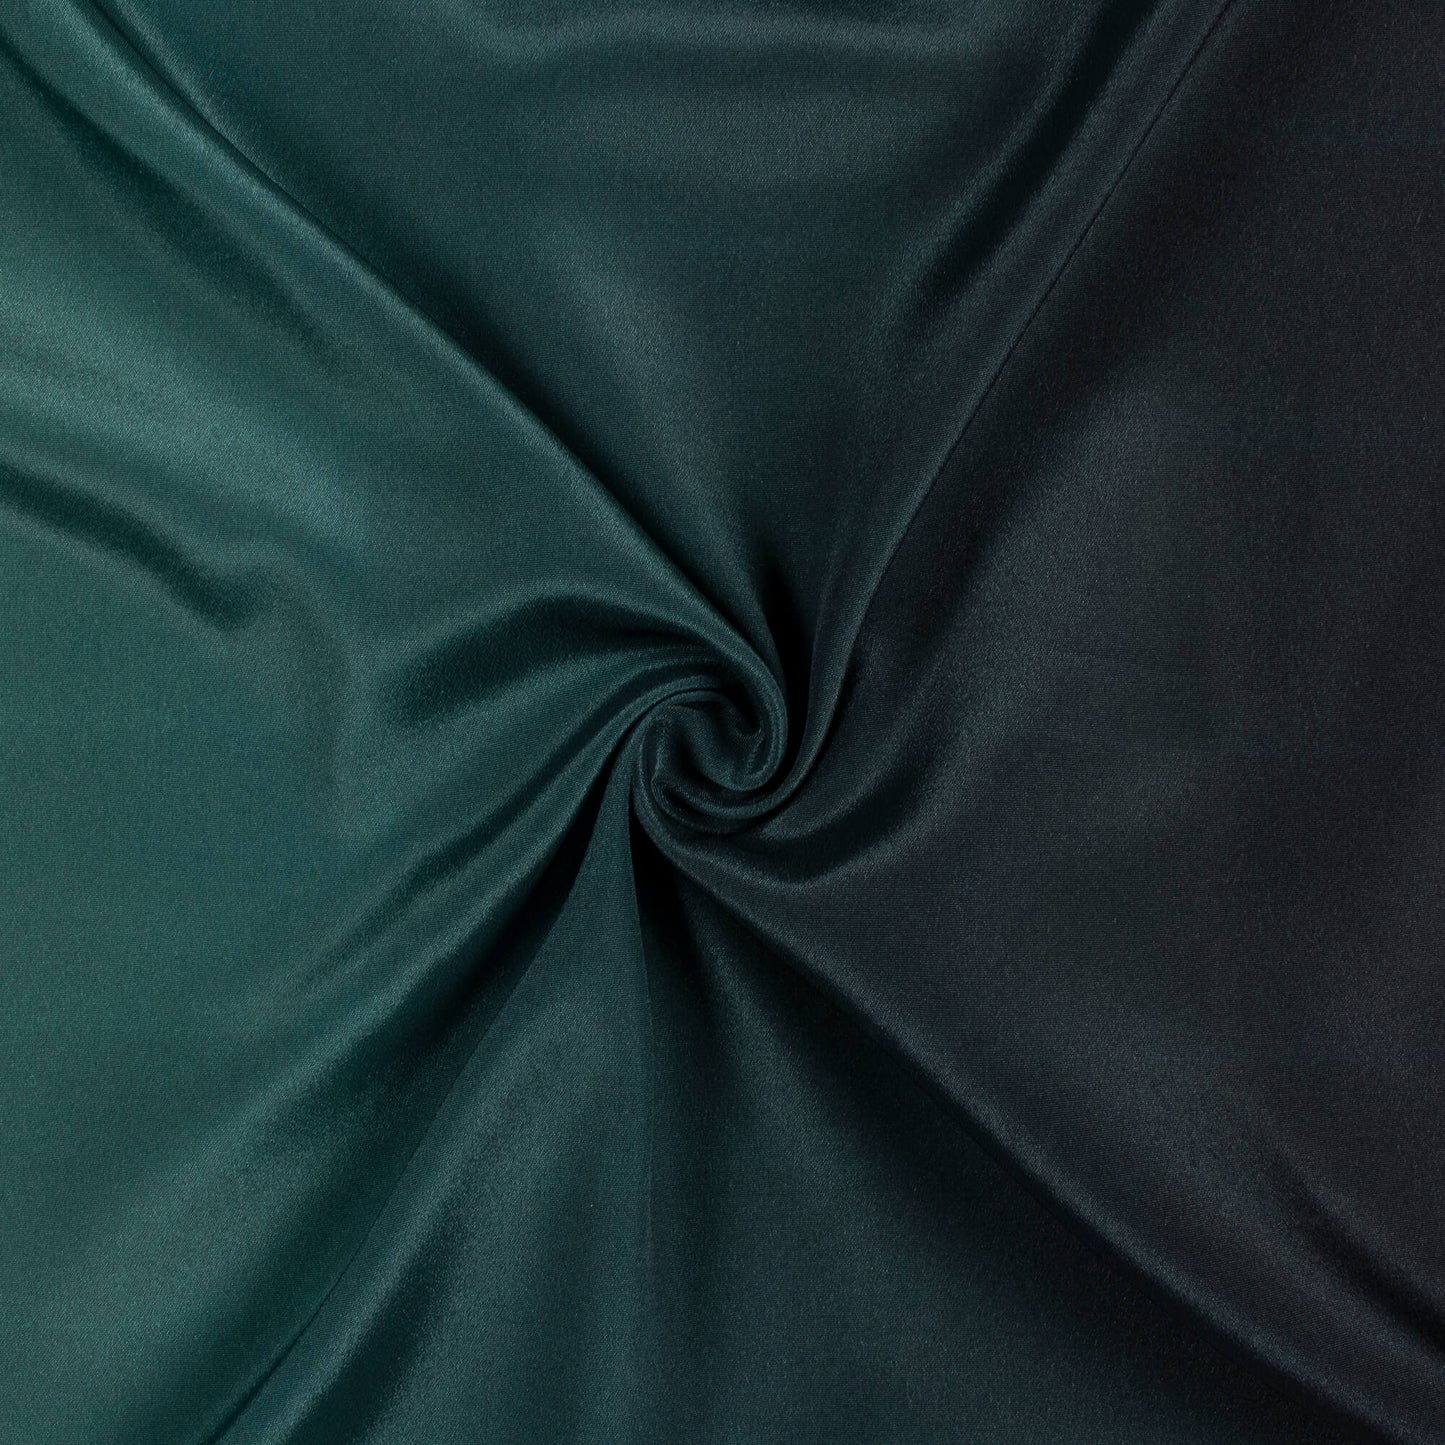 Black And Sage Green Ombre Pattern Digital Print Crepe Silk Fabric